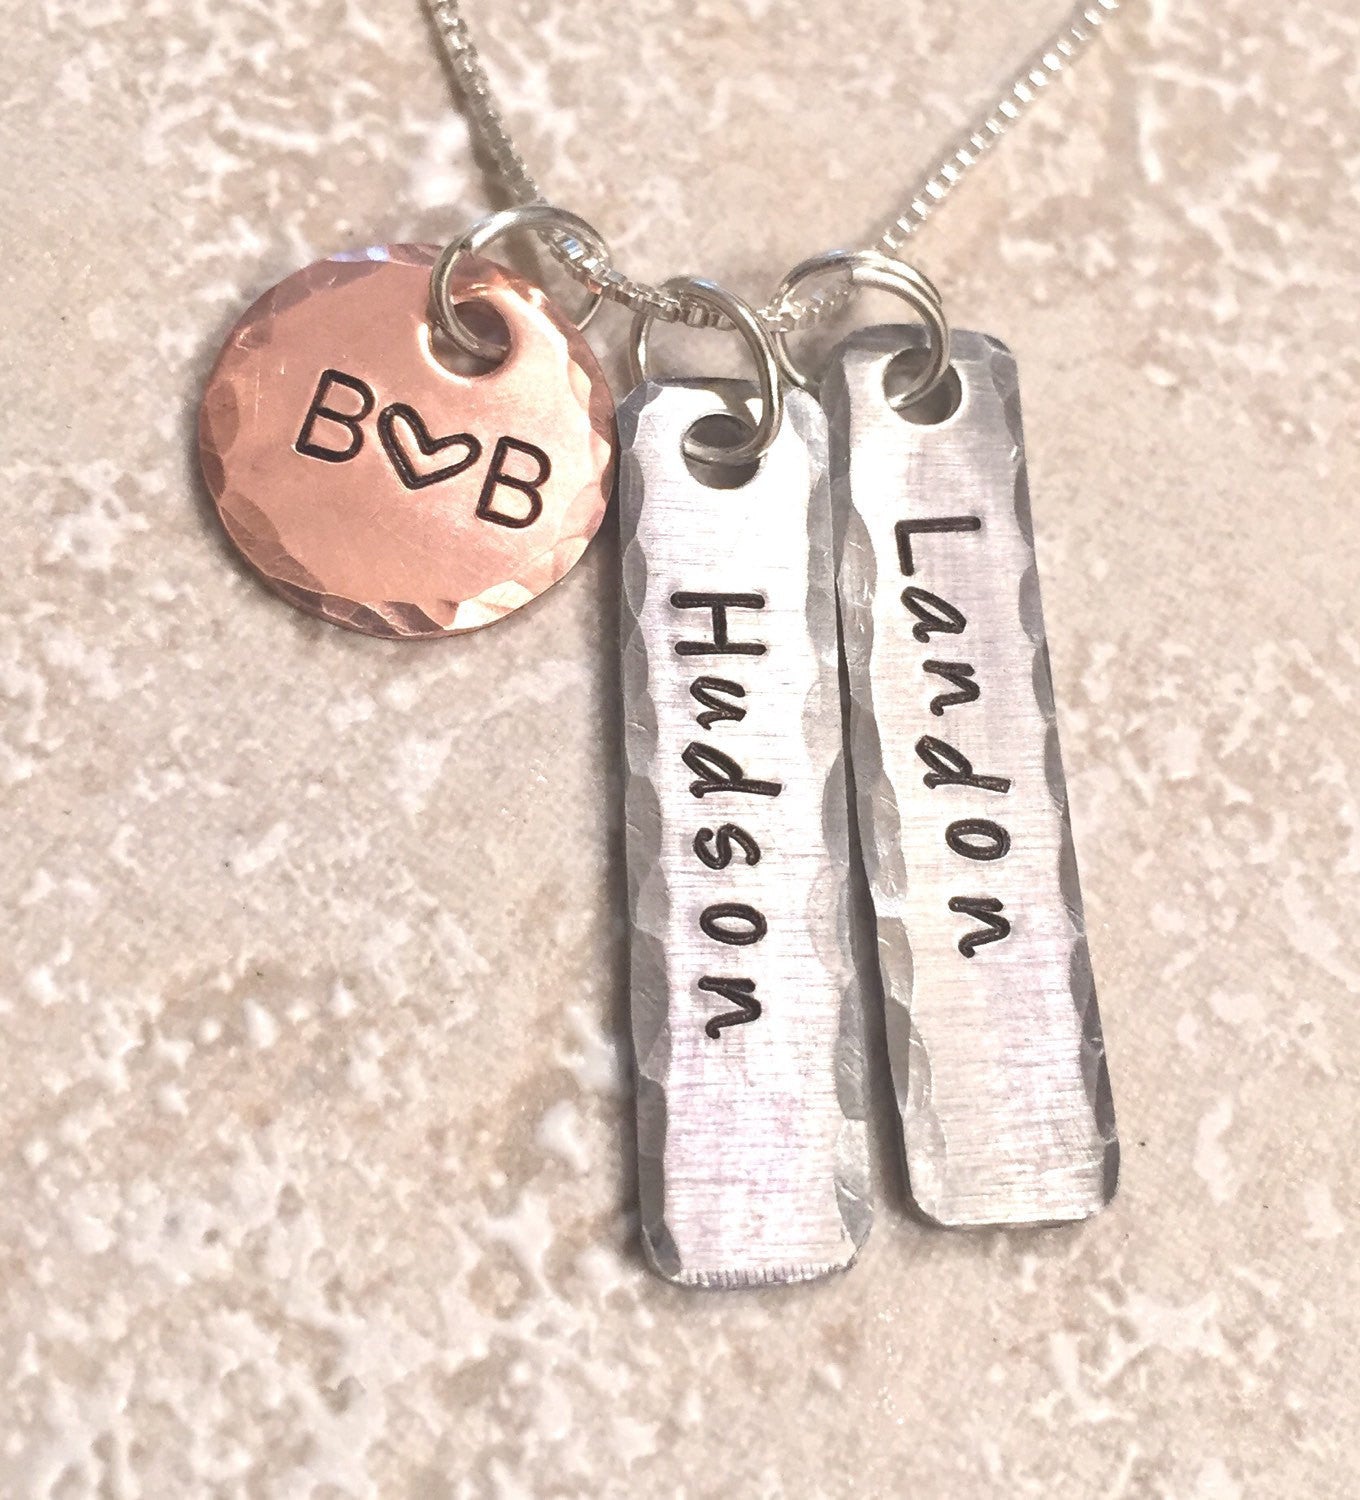 Mom Necklace, Children's Name Necklace, Hand Stamped Personalized Necklace, Personalized Necklace,natashaaloha - Natashaaloha, jewelry, bracelets, necklace, keychains, fishing lures, gifts for men, charms, personalized, 